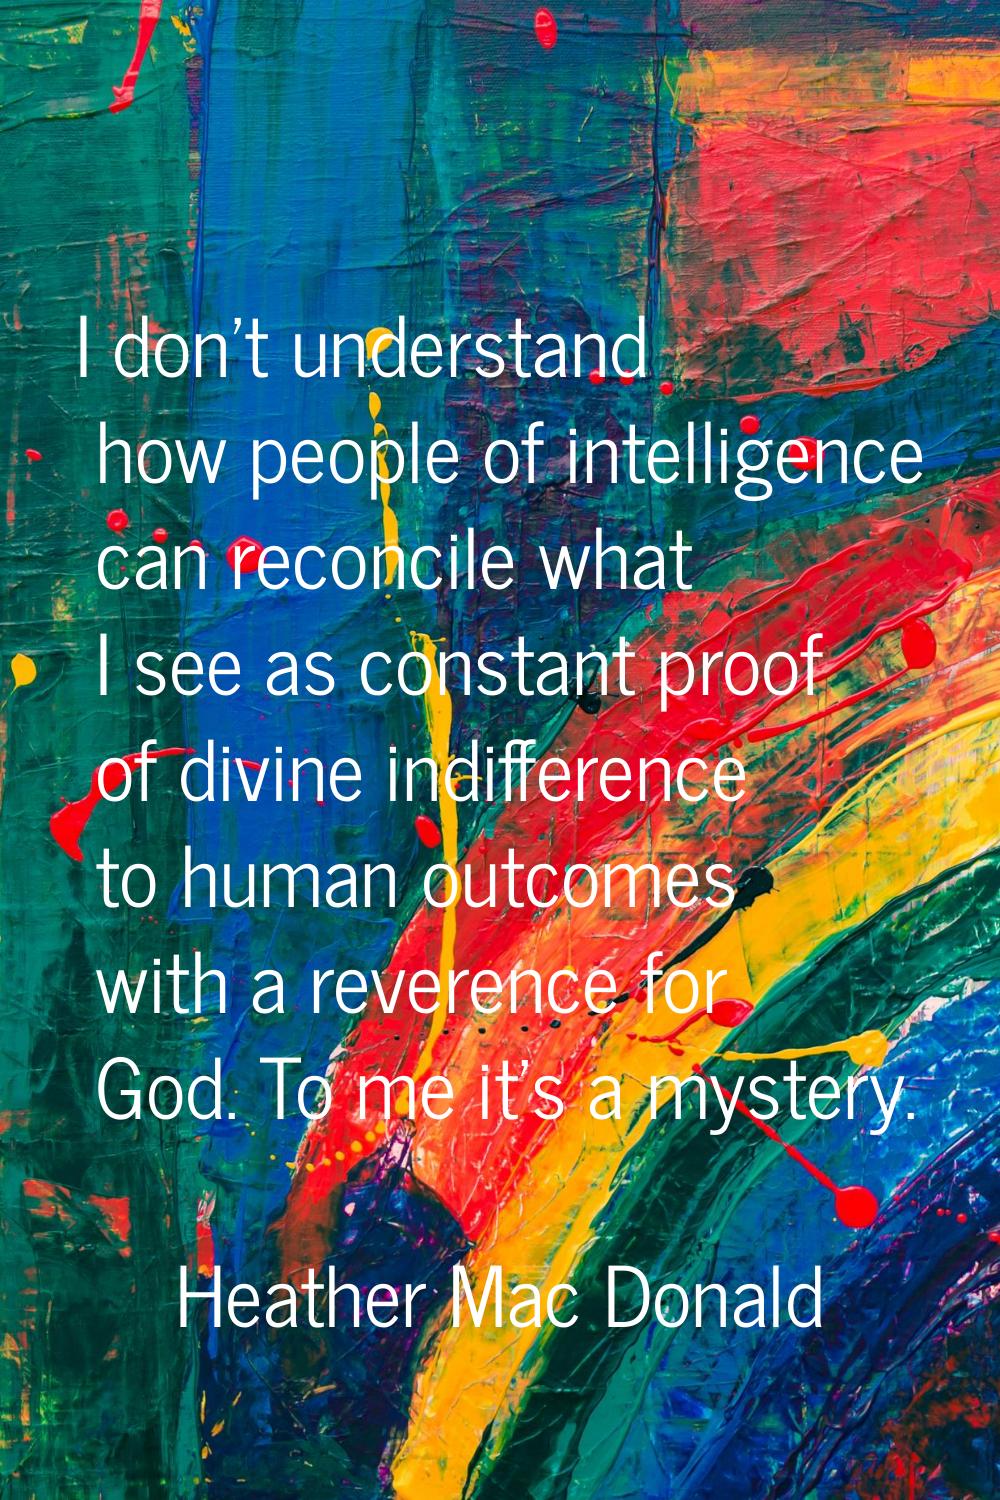 I don't understand how people of intelligence can reconcile what I see as constant proof of divine 